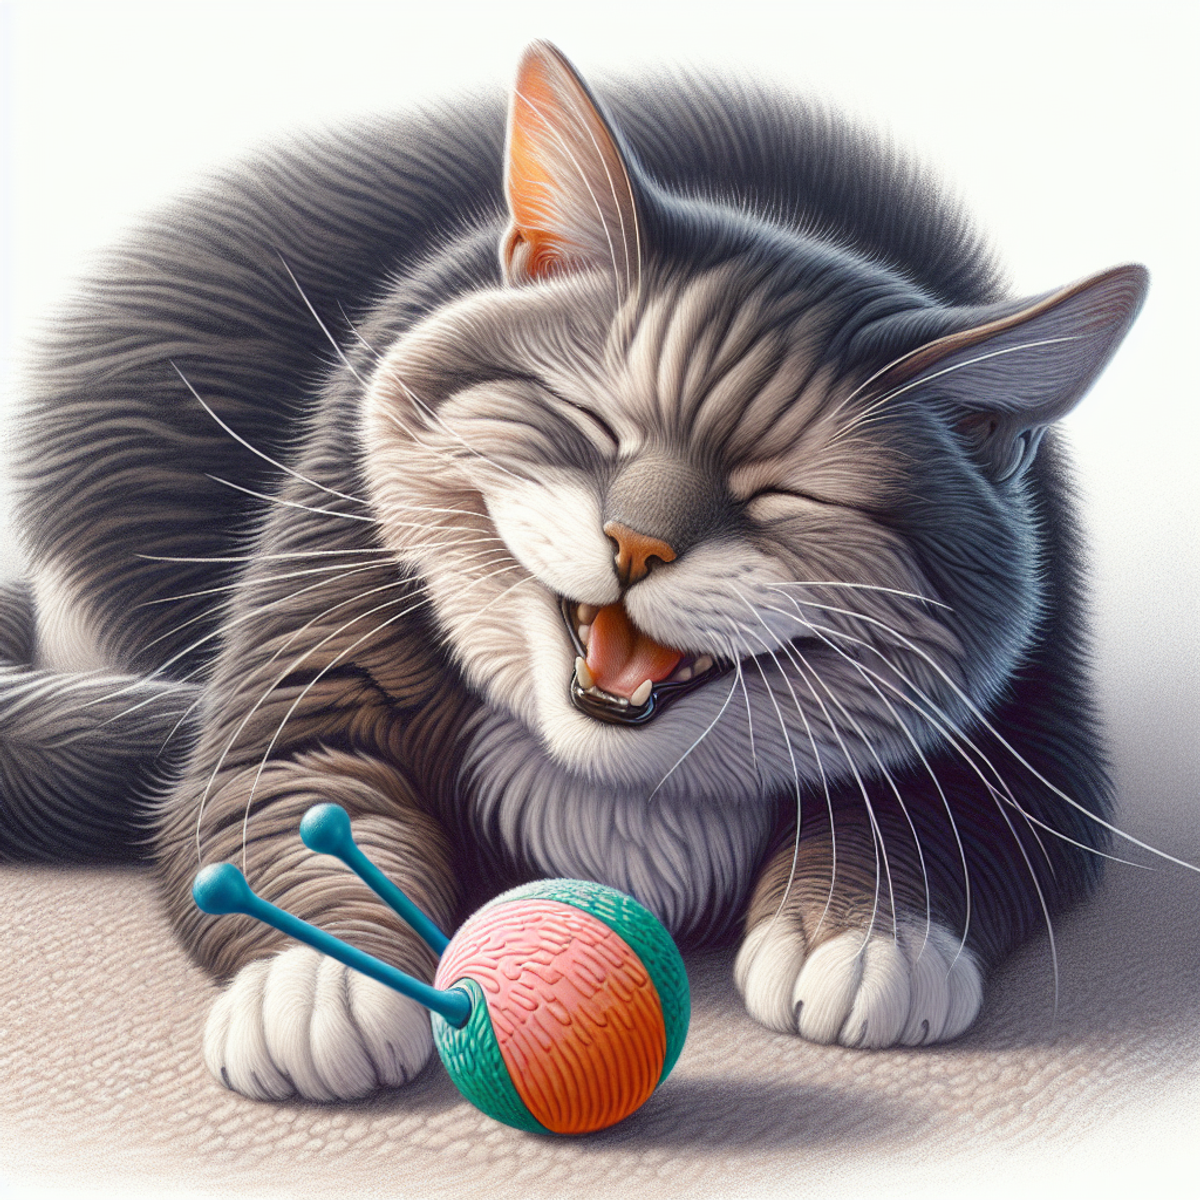 An elderly cat happily playing with a senior cat toy.